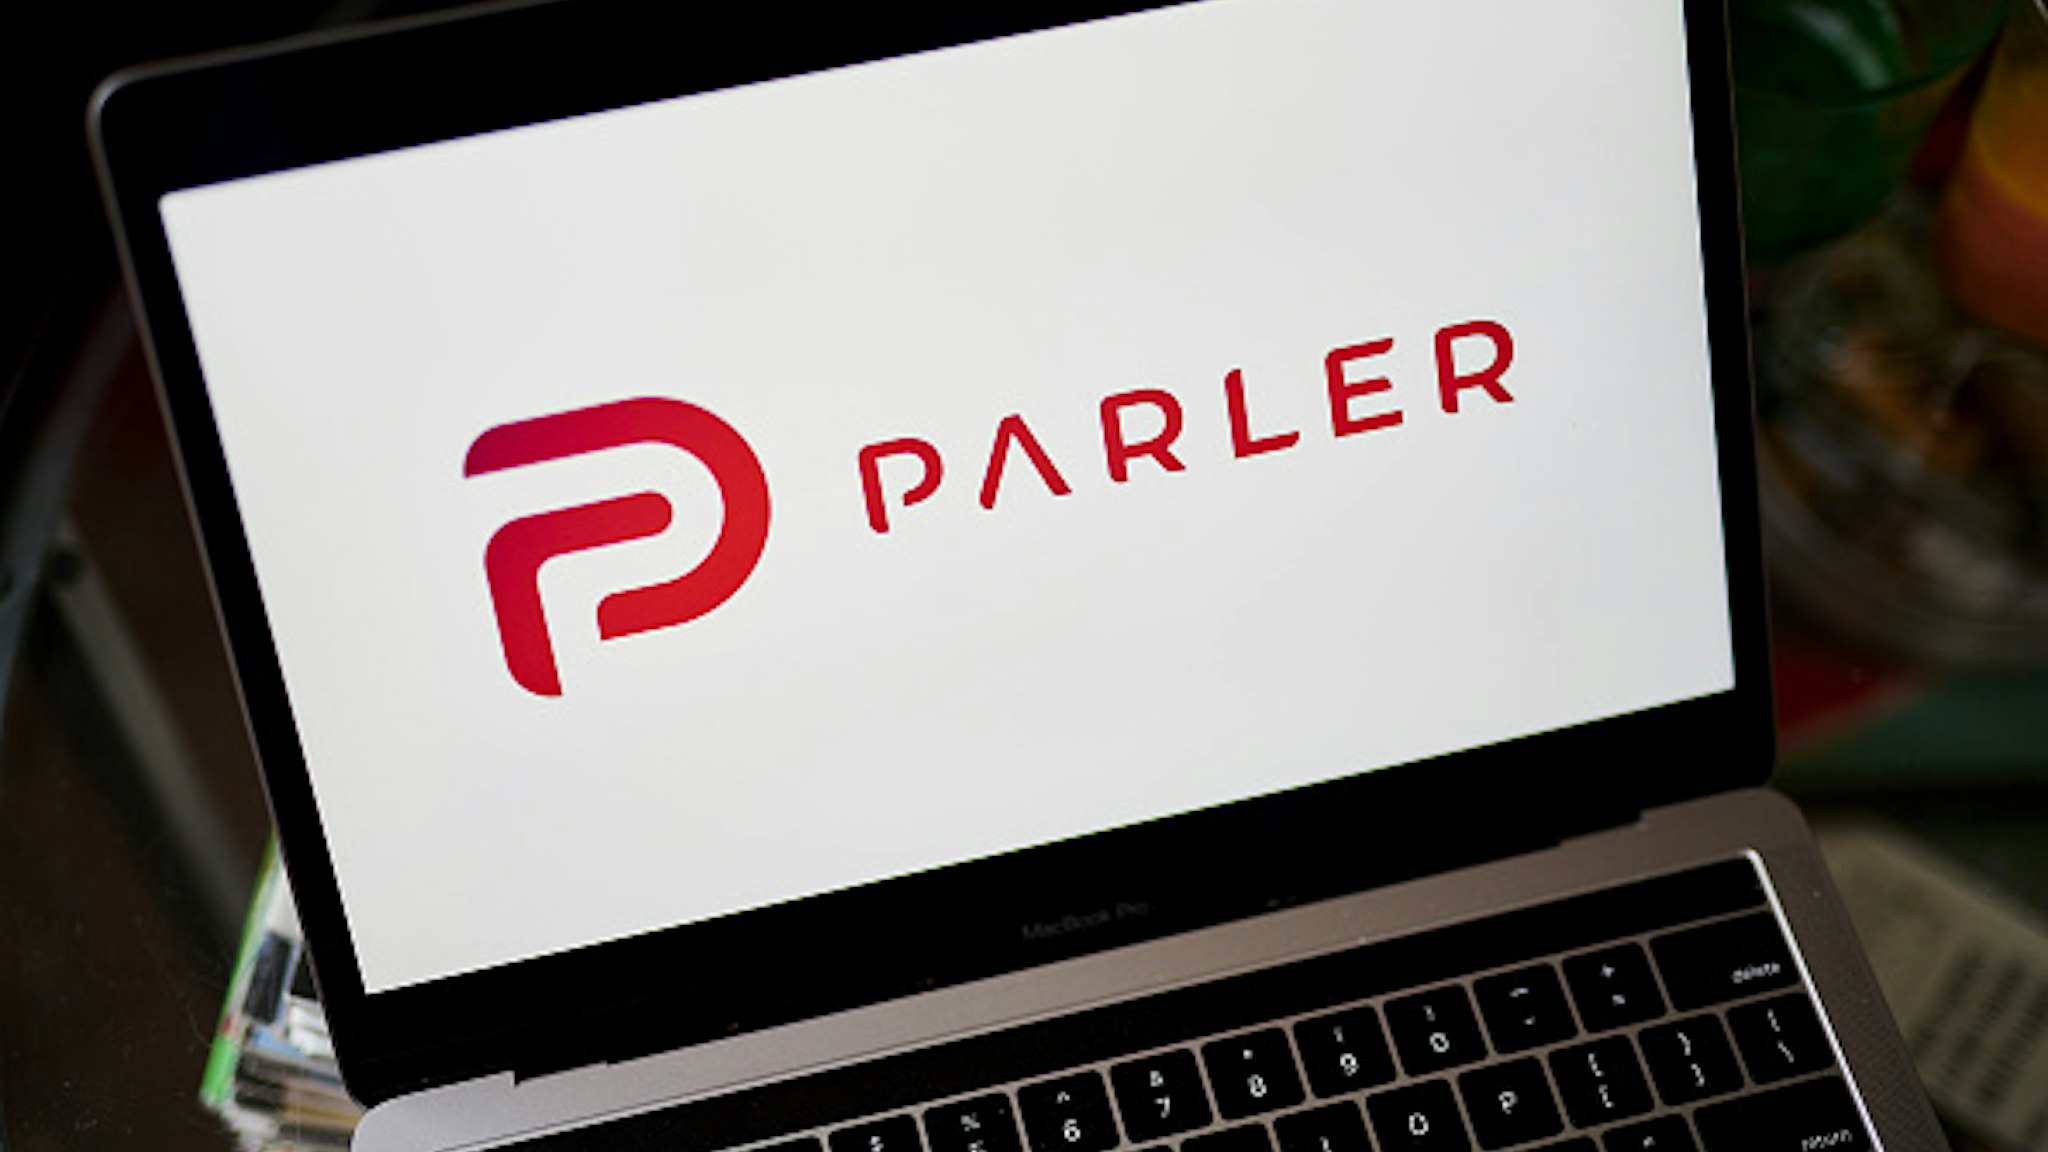 The Parler logo on a laptop computer arranged in the Brooklyn borough of New York, U.S., on Friday, Dec. 18, 2020. Parler bills itself as a non-biased social network that protects free speech and user data. John Matze, chief executive officer, says the platform saw great growth during the 2020 election as many conservatives moved away from products like Facebook and Twitter.